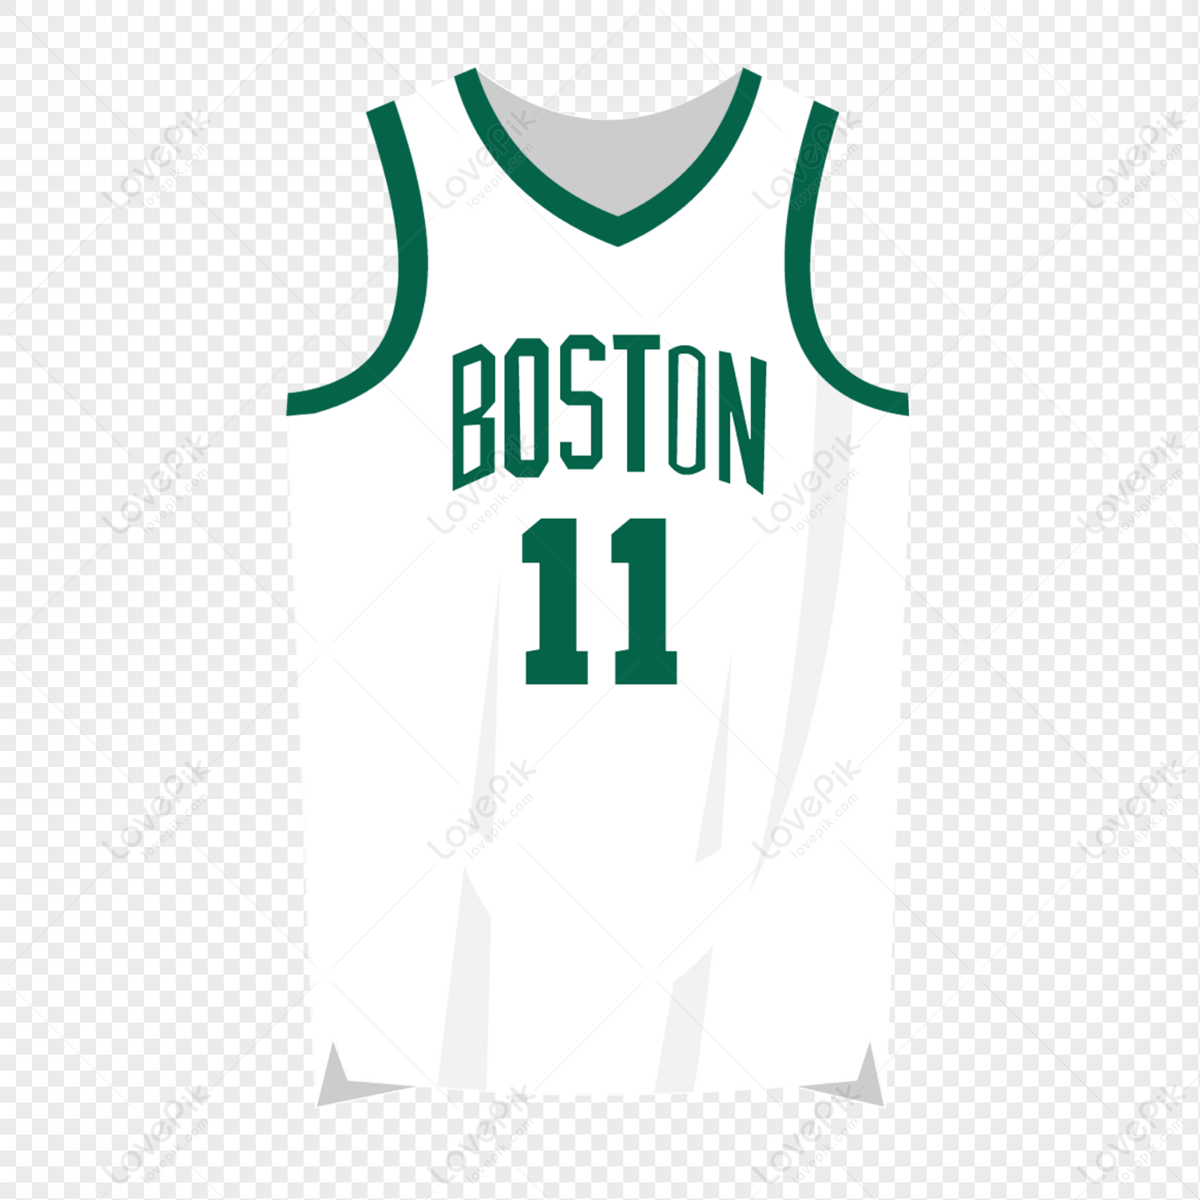 Painted Nba And Clipart Image For Free Download - Lovepik | 401306098